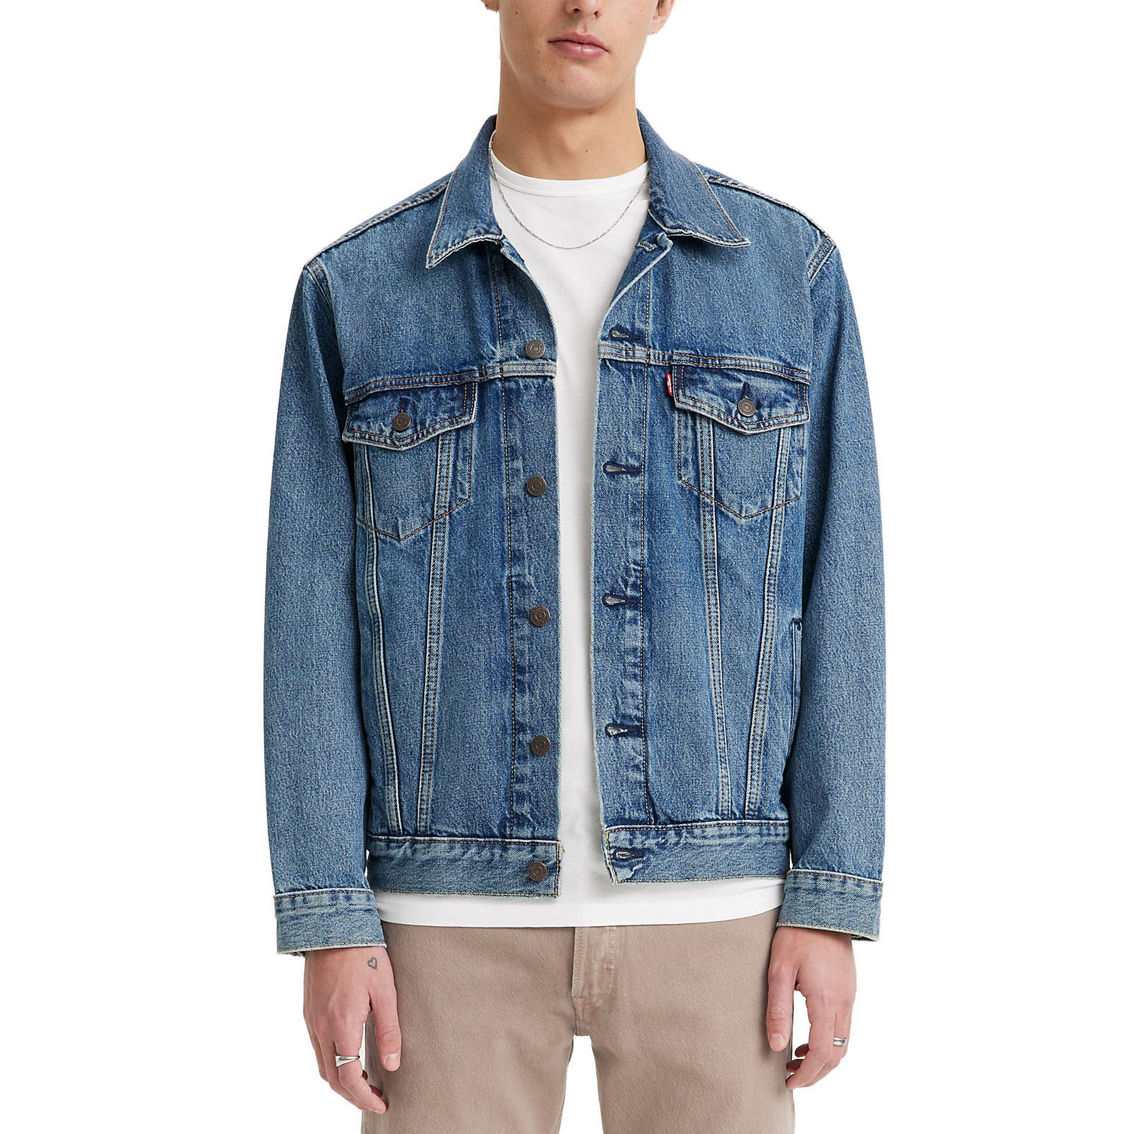 Levi's Relaxed Fit Trucker Jacket | Jackets | Clothing & Accessories ...